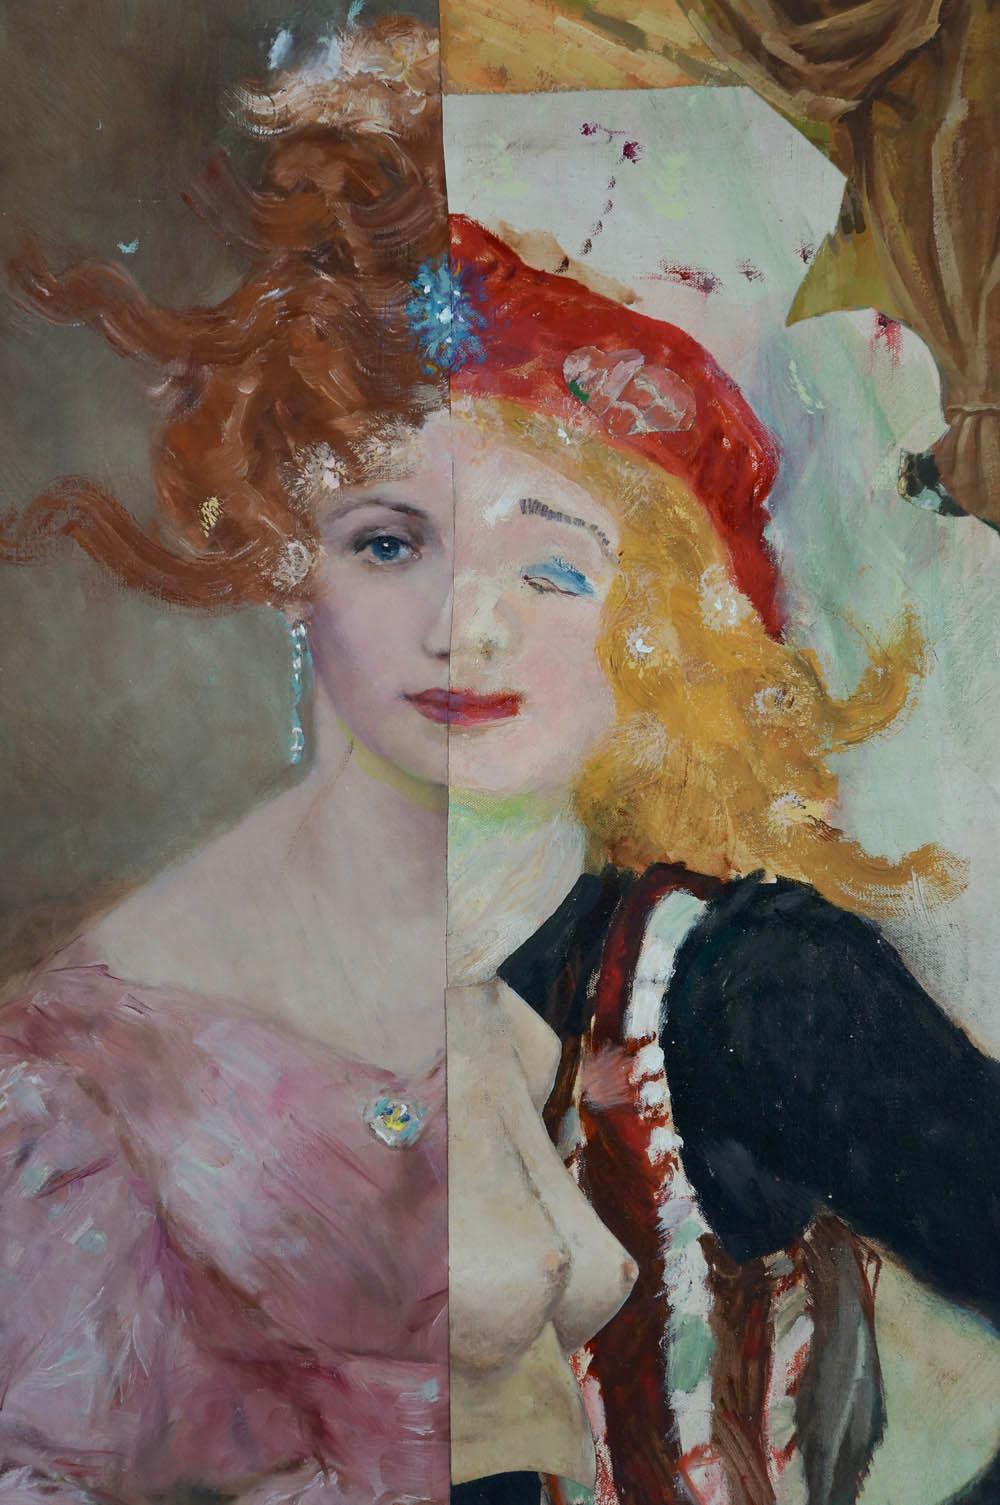 John Baker’s “At the Cotillion: an Imaginary Portrait”, a 48 x 34 x 1.5 inch acrylic painting with collage on canvas, is from the artist’s Socialite series. Half bejeweled debutante/matron in pink with auburn hair and half fashion-less, rag-tag